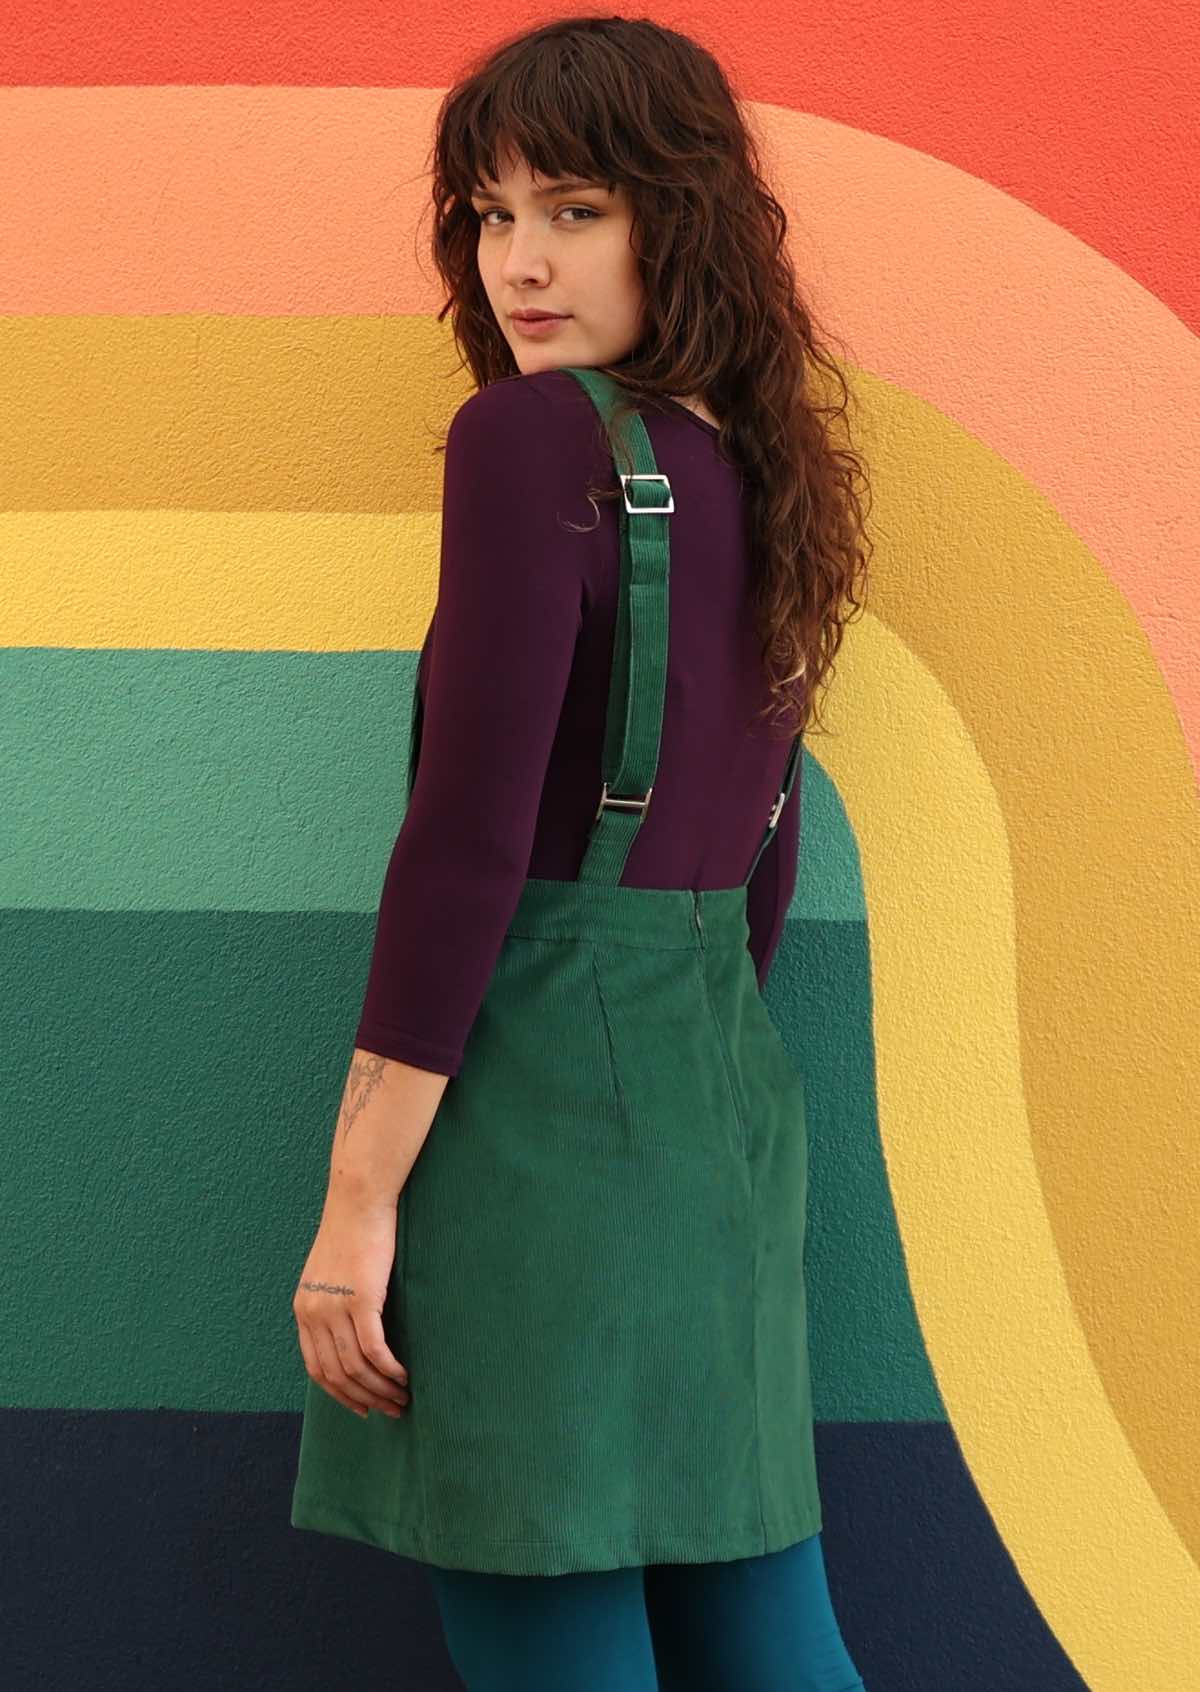 woman wearing green corduroy pinafore over purple top and teal leggings back view